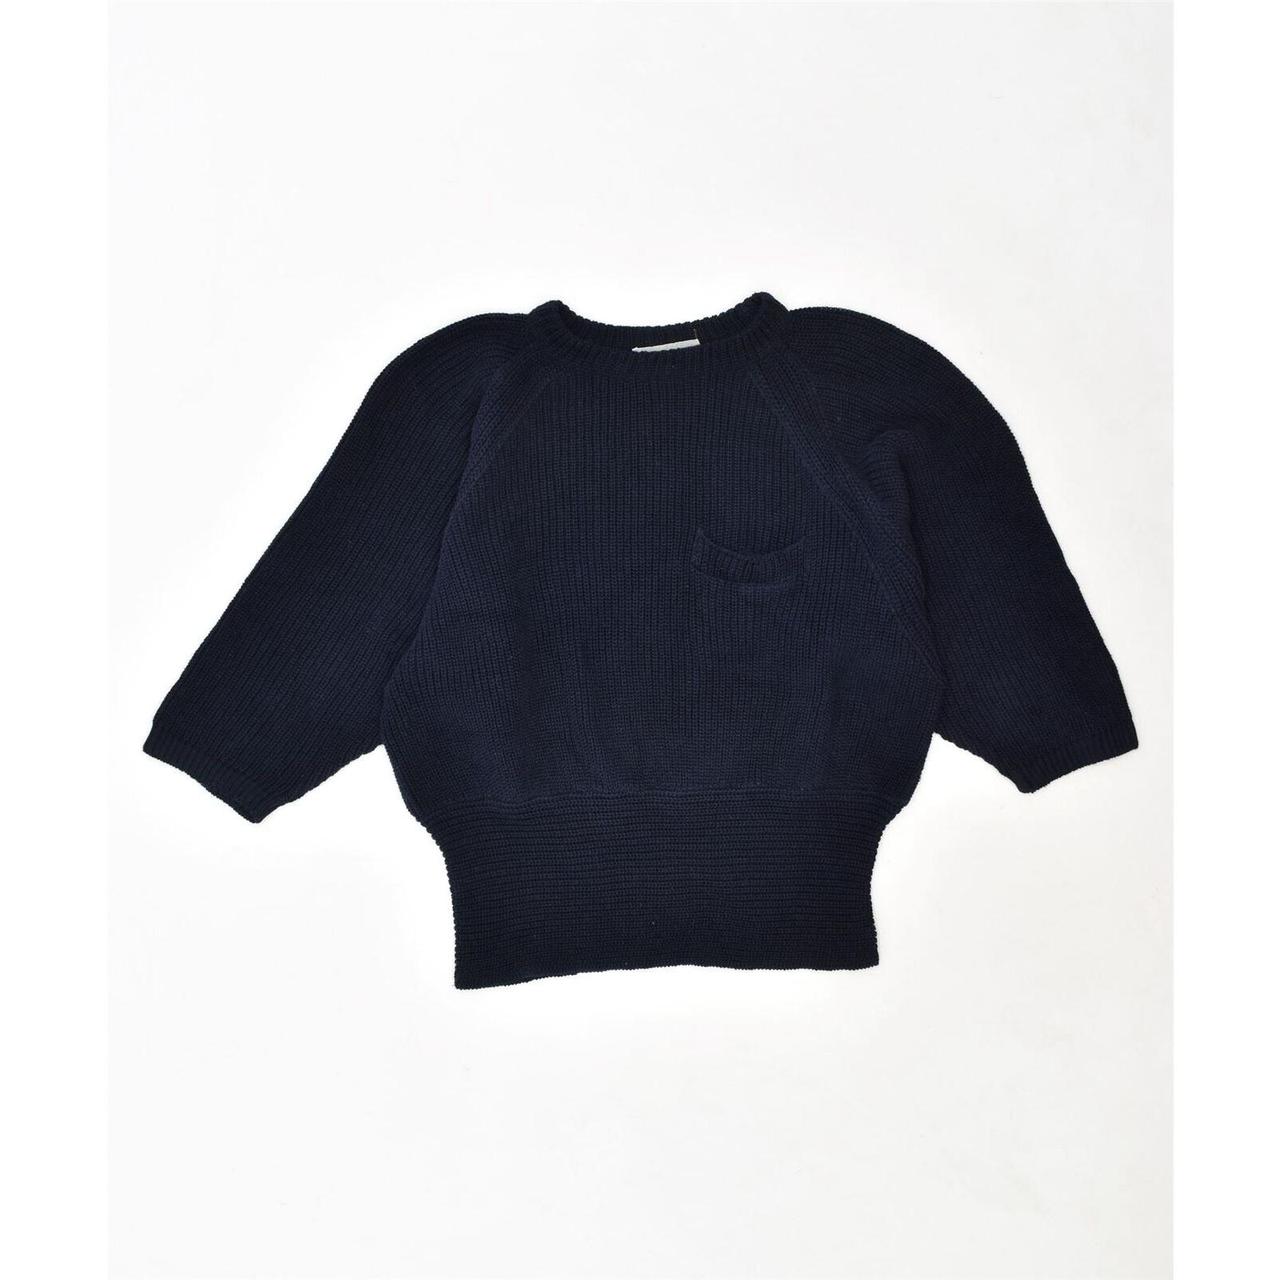 Claire's Women's Blue and Navy Jumper | Depop